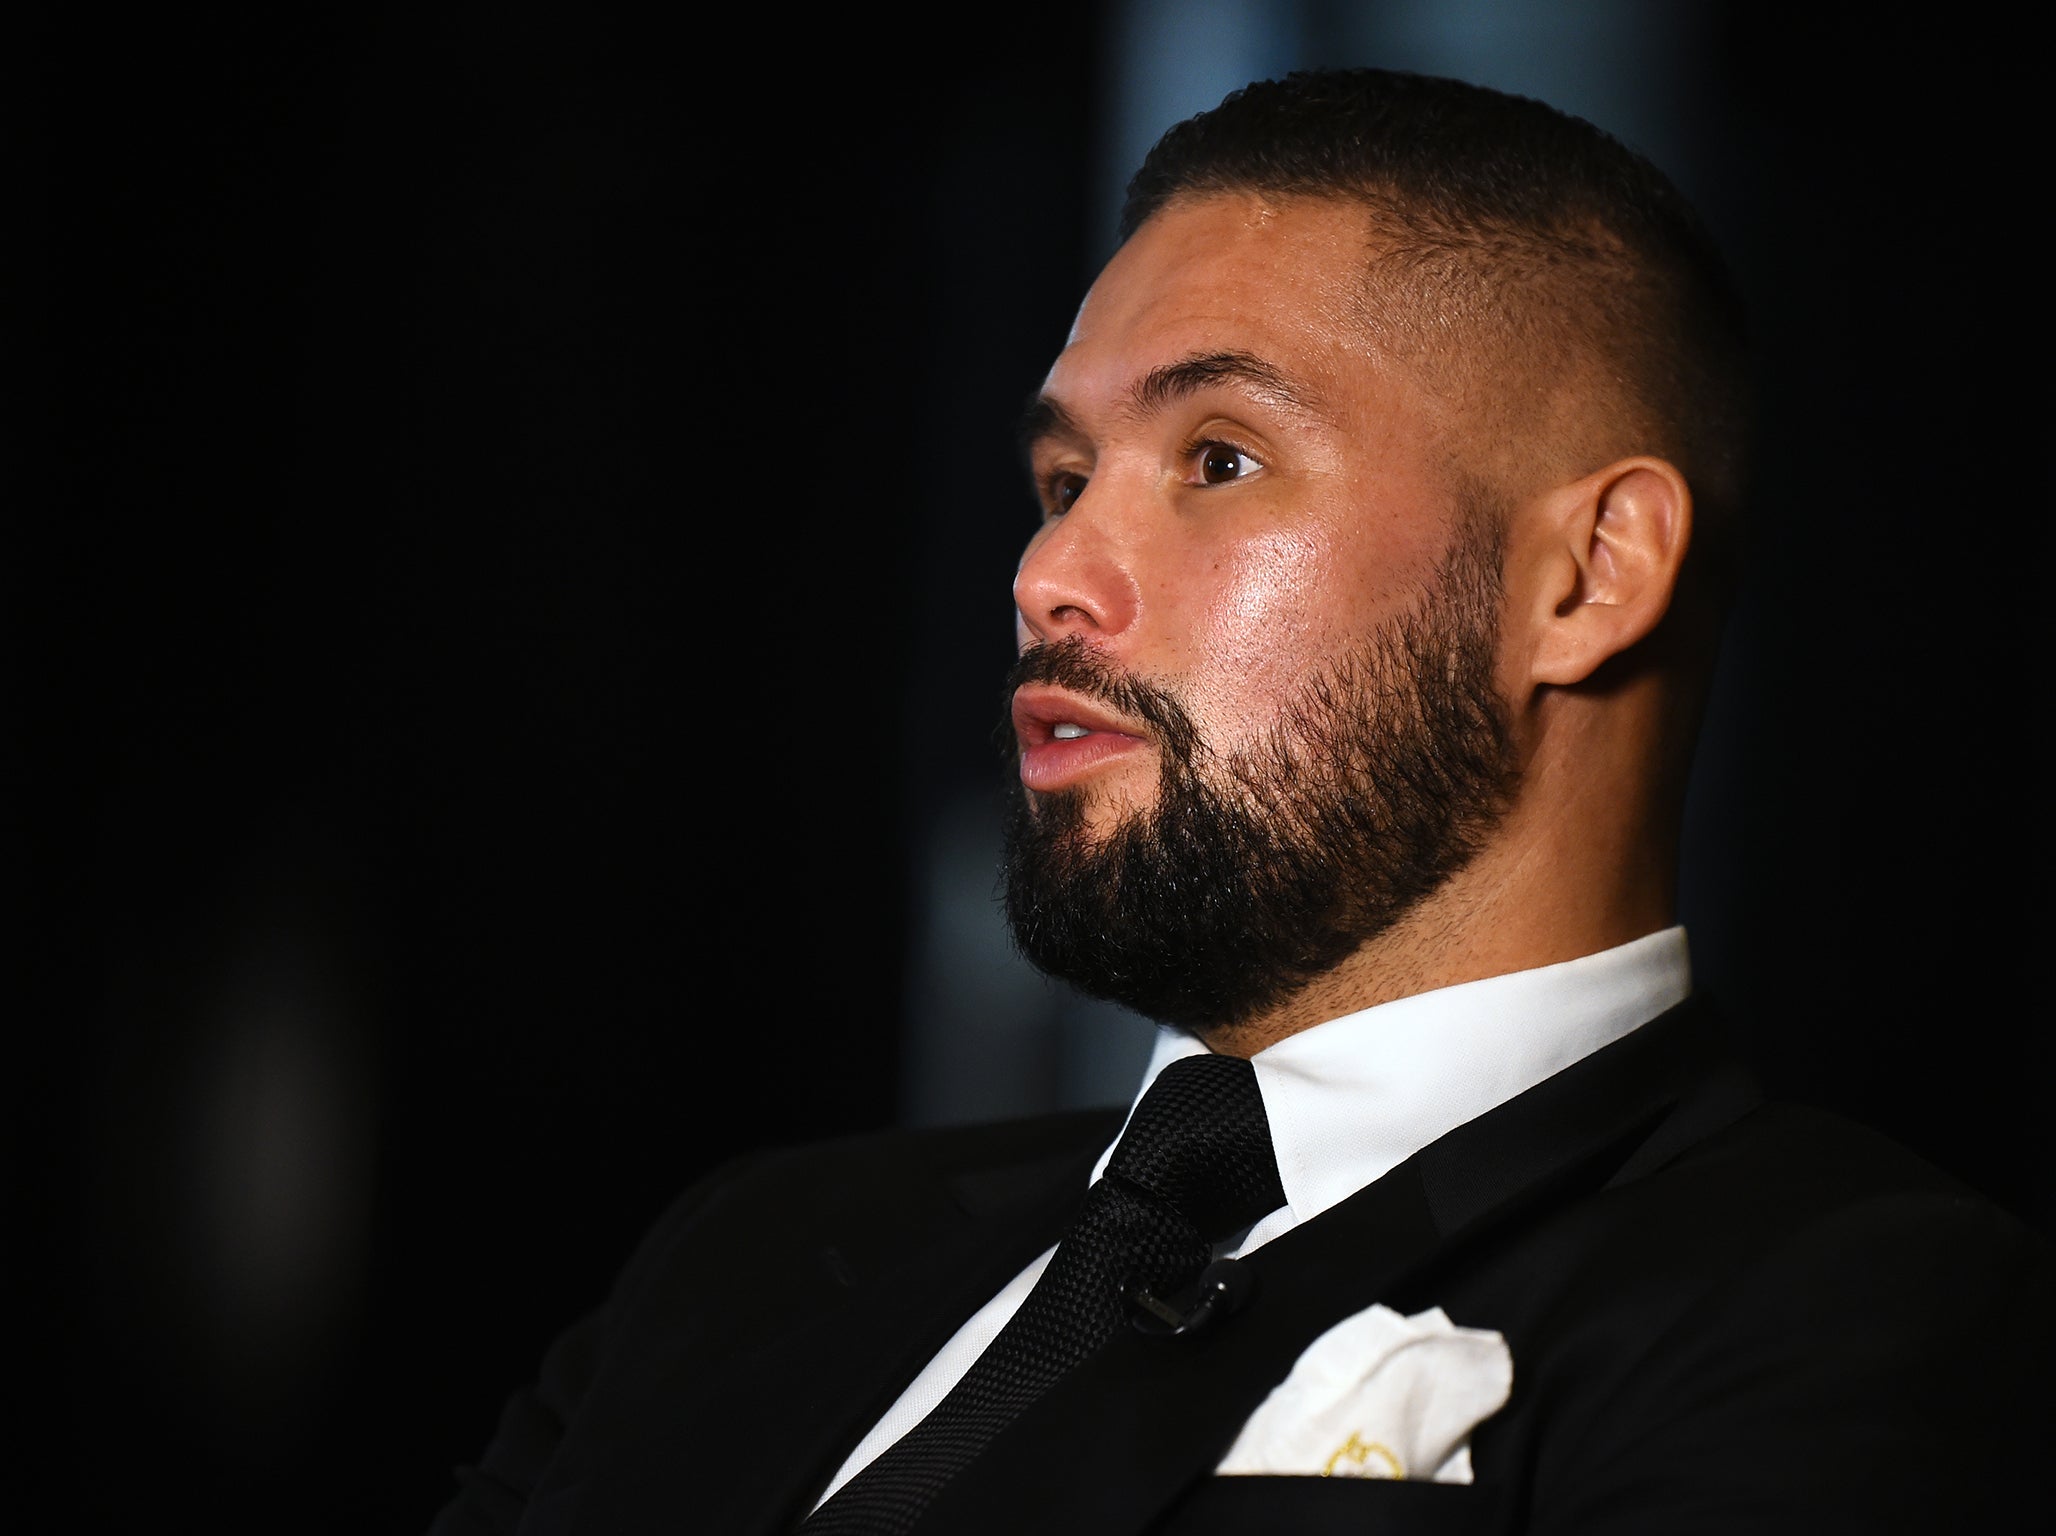 Bellew has not fought in Manchester since 2008